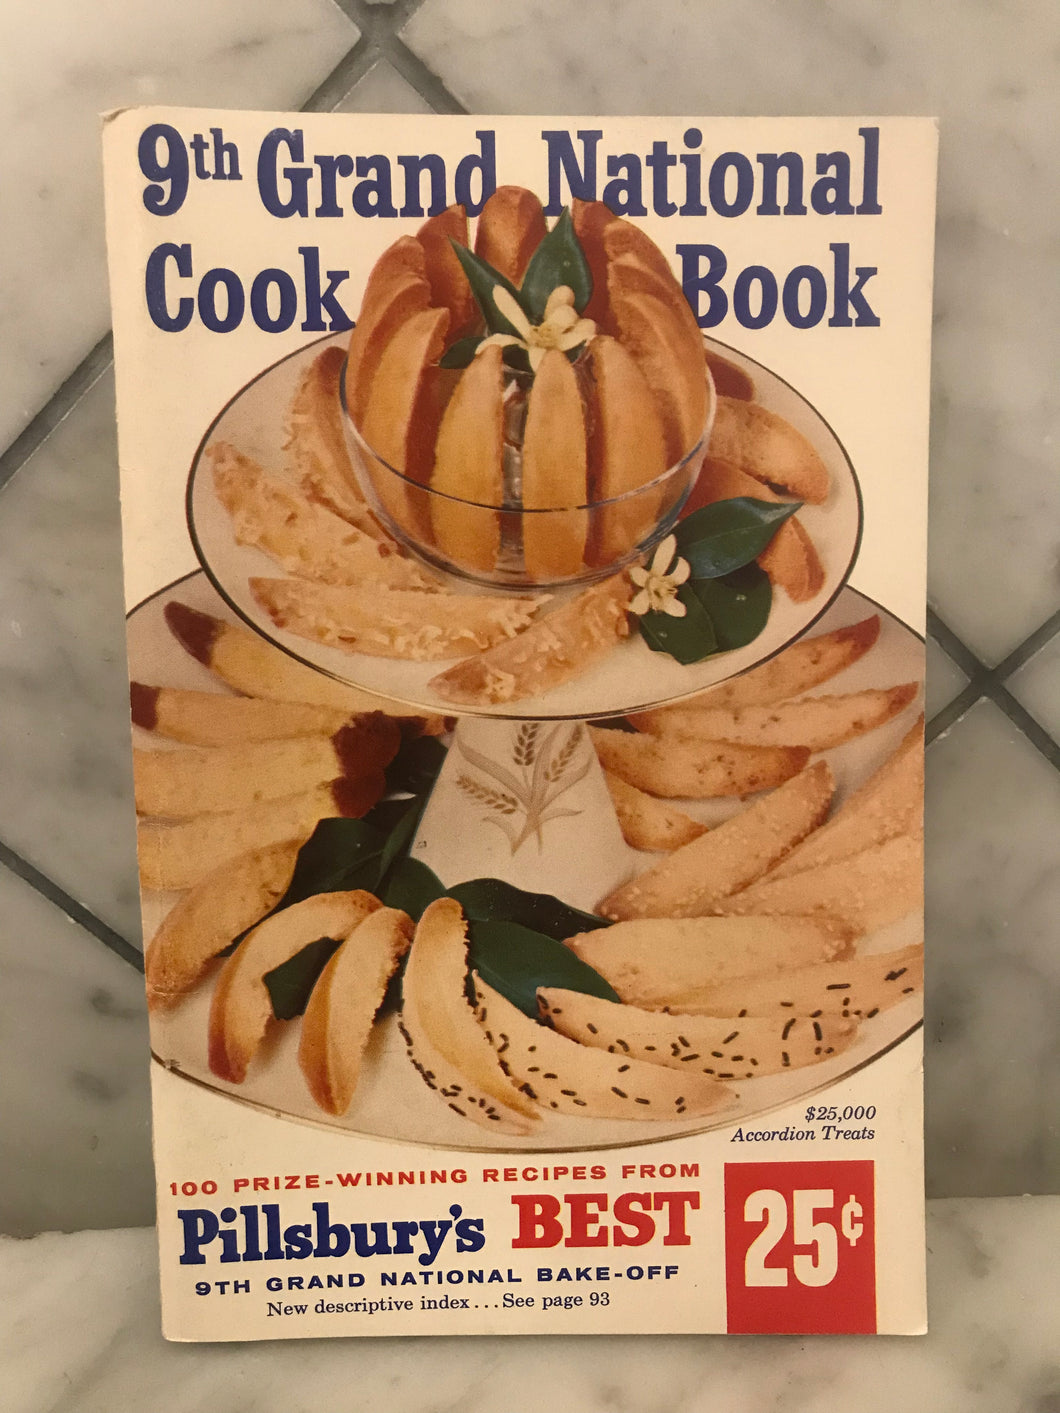 9th Grand National Cook Book, 100 Prize-Winning Recipes from Pillsbury's Best